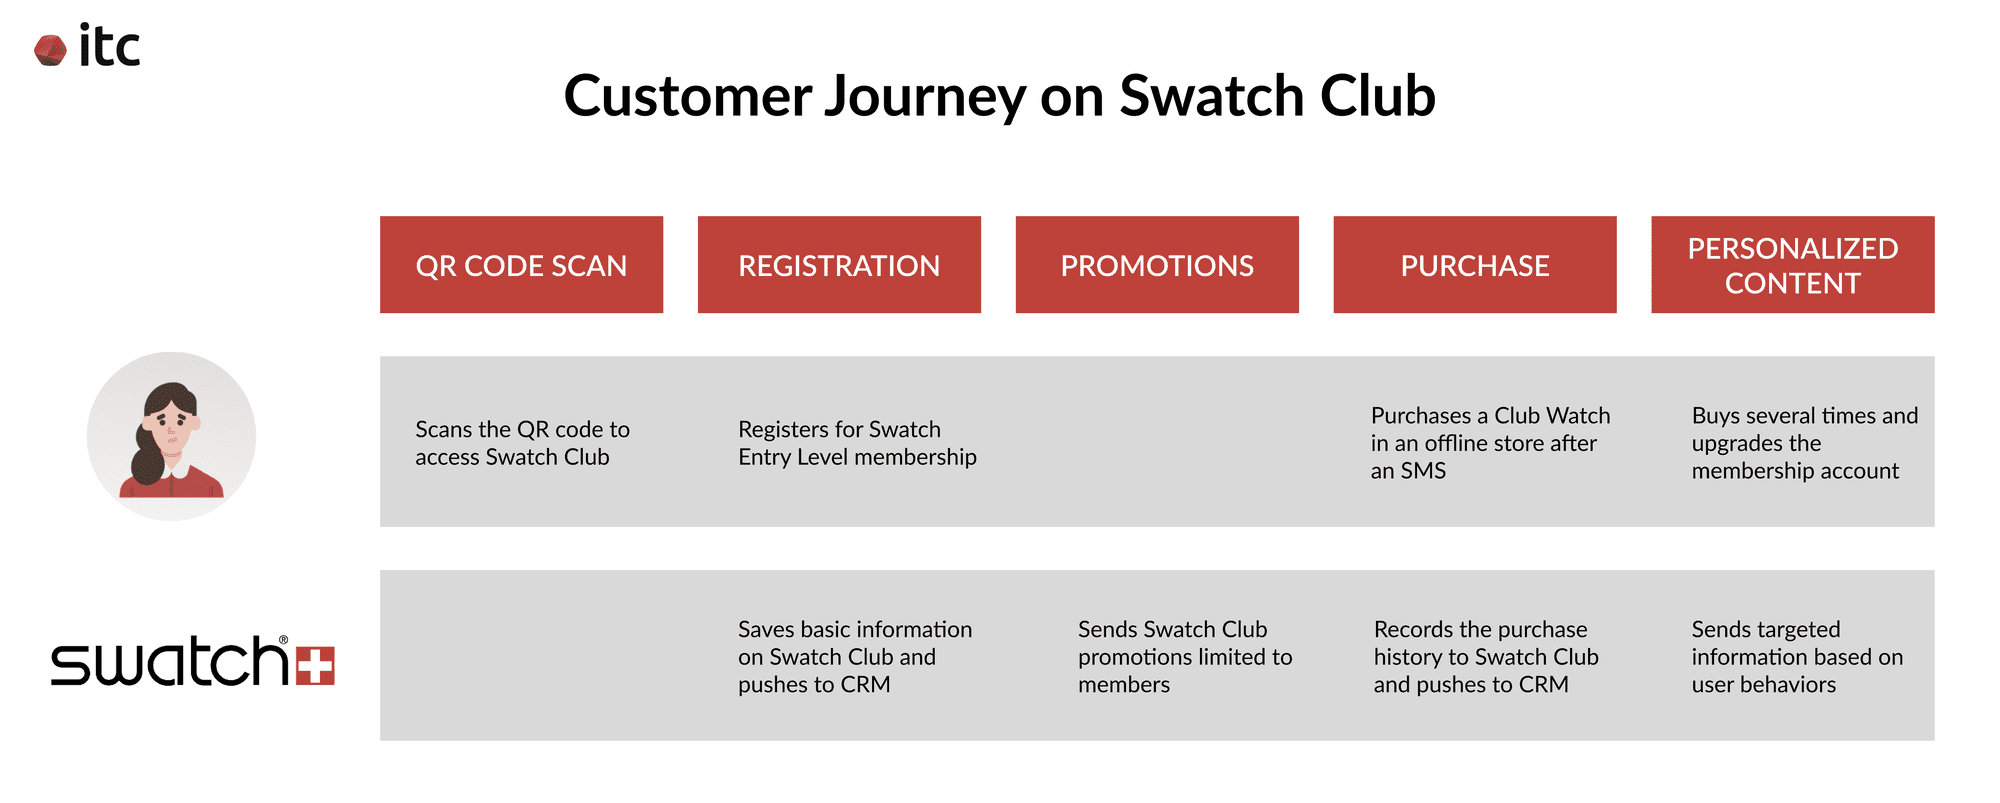 A chart illustrating the customer journey and the company's responses on Swatch Club